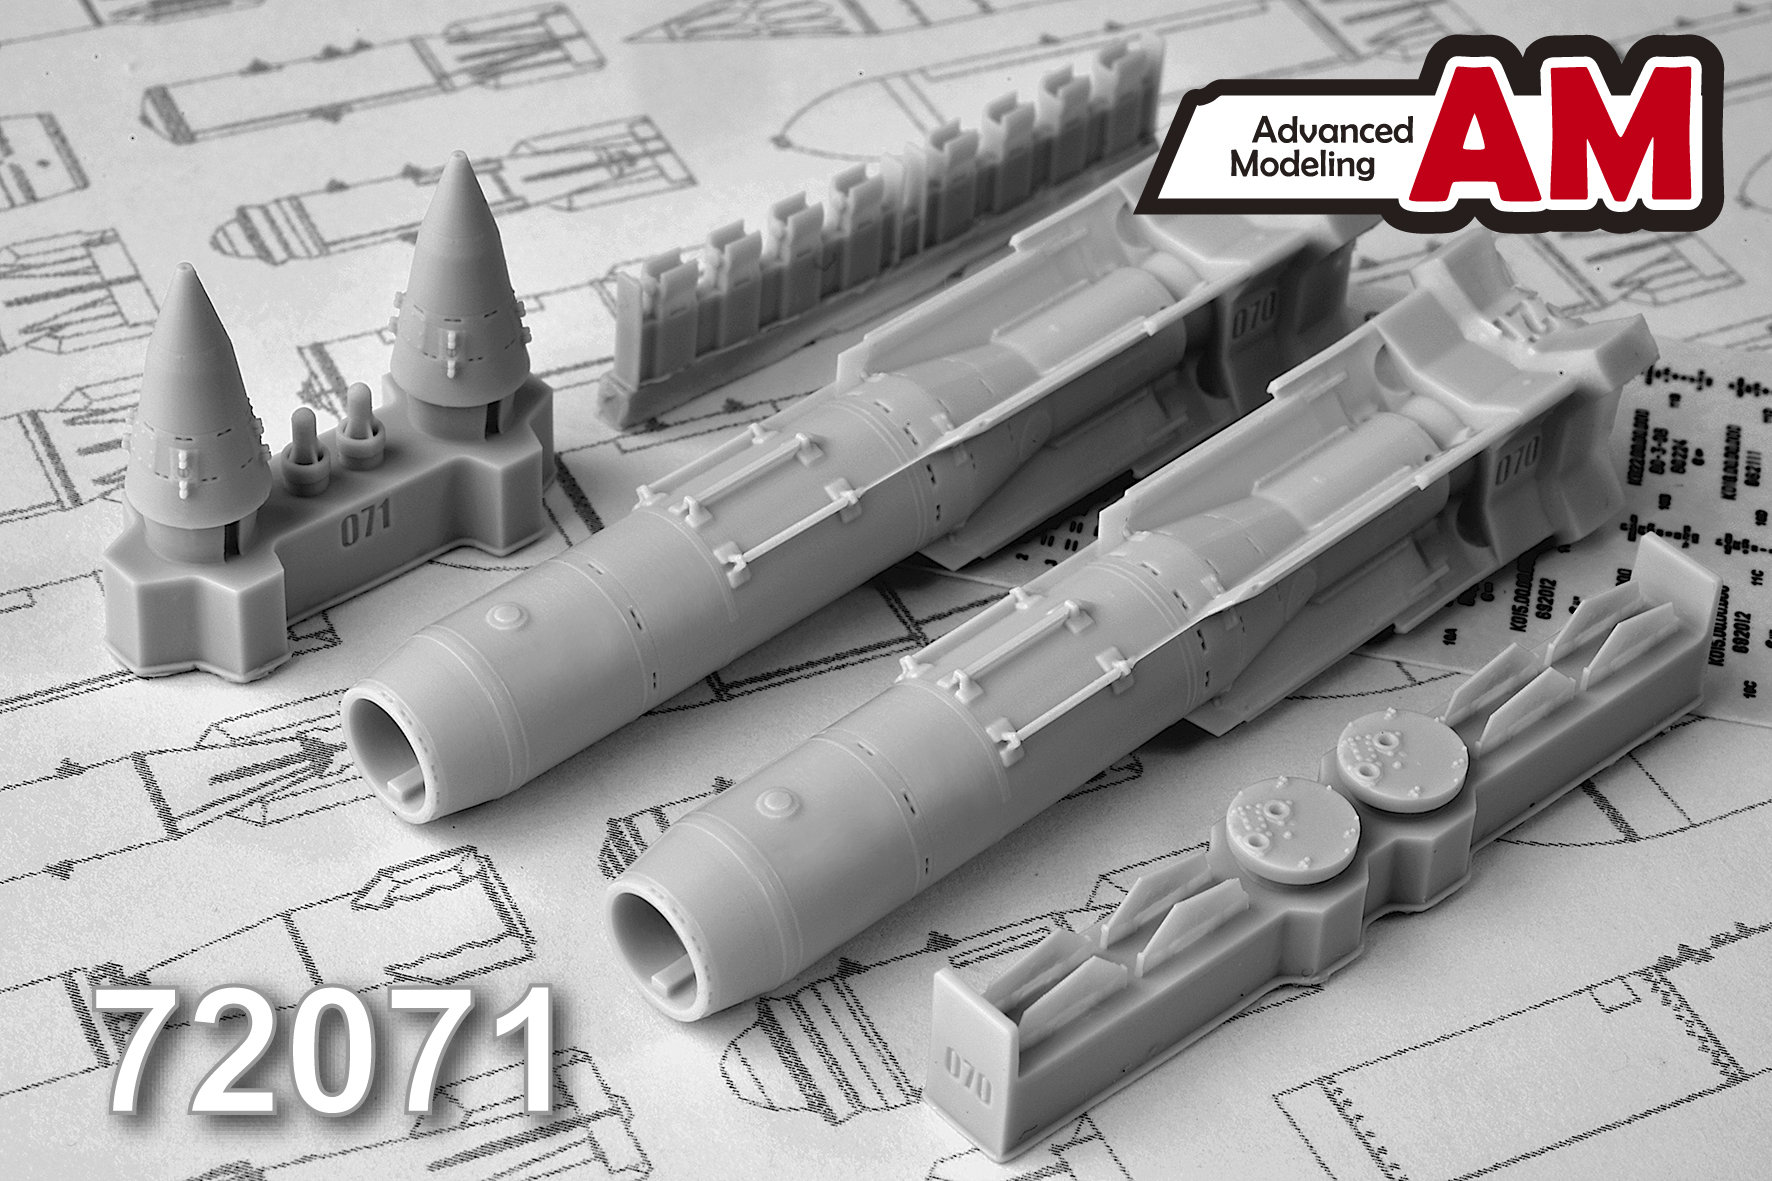 Additions (3D resin printing) 1/72 KAB-1500L Corrective Air Bomb (Advanced Modeling) 